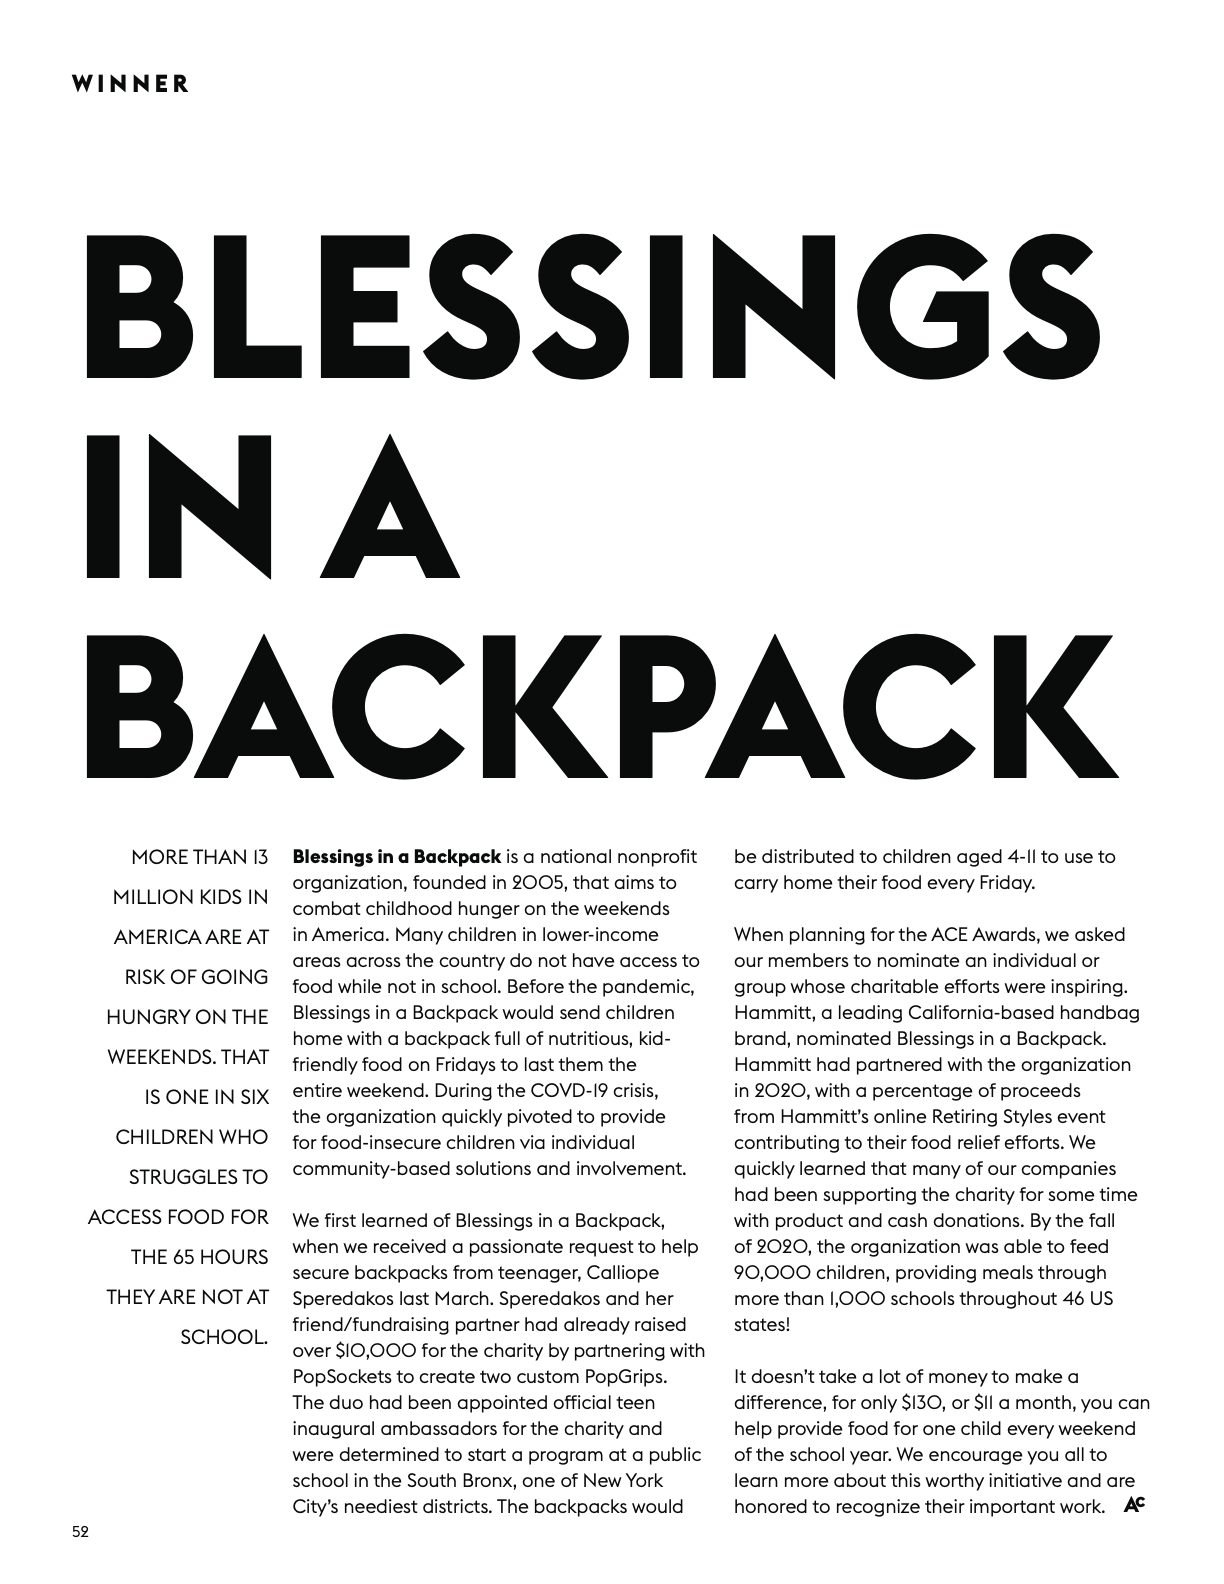 Article about Blessings by ACE Awards